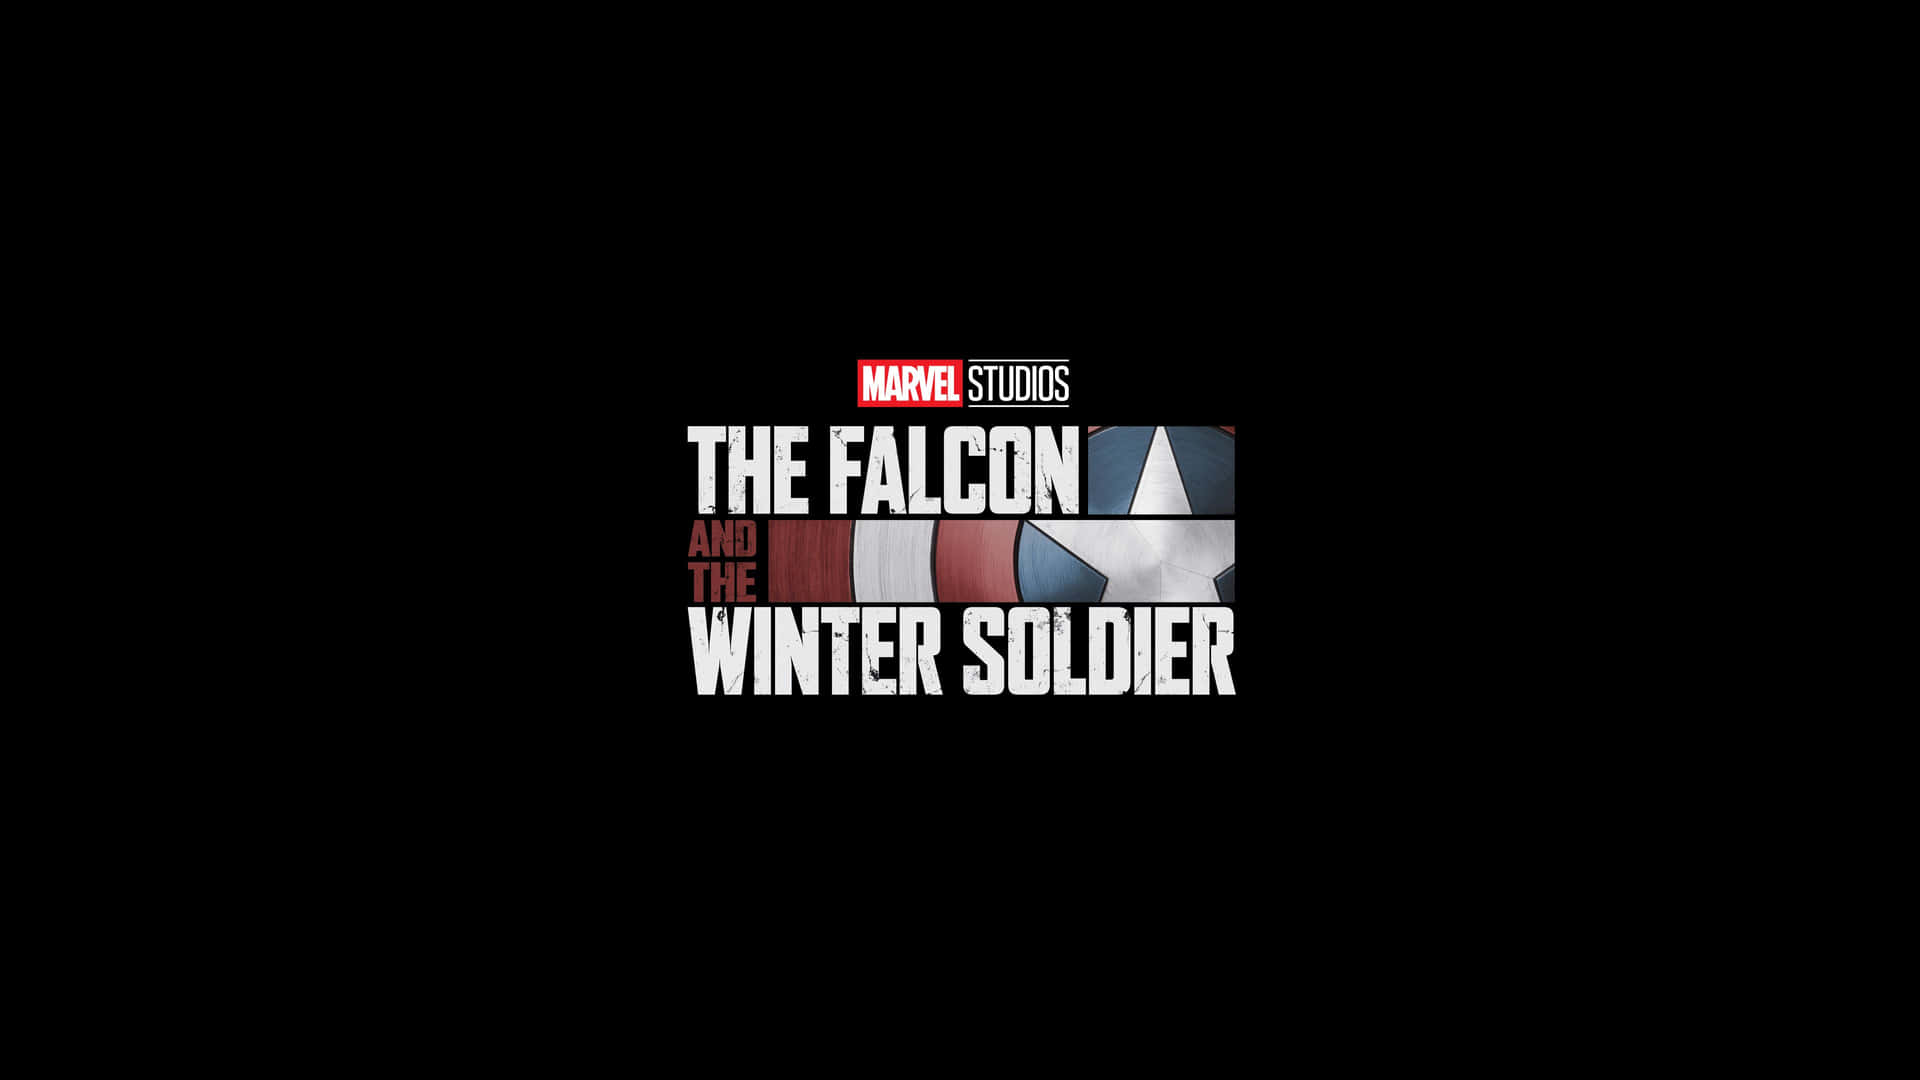 Falcon Soars High with Marvel Wallpaper